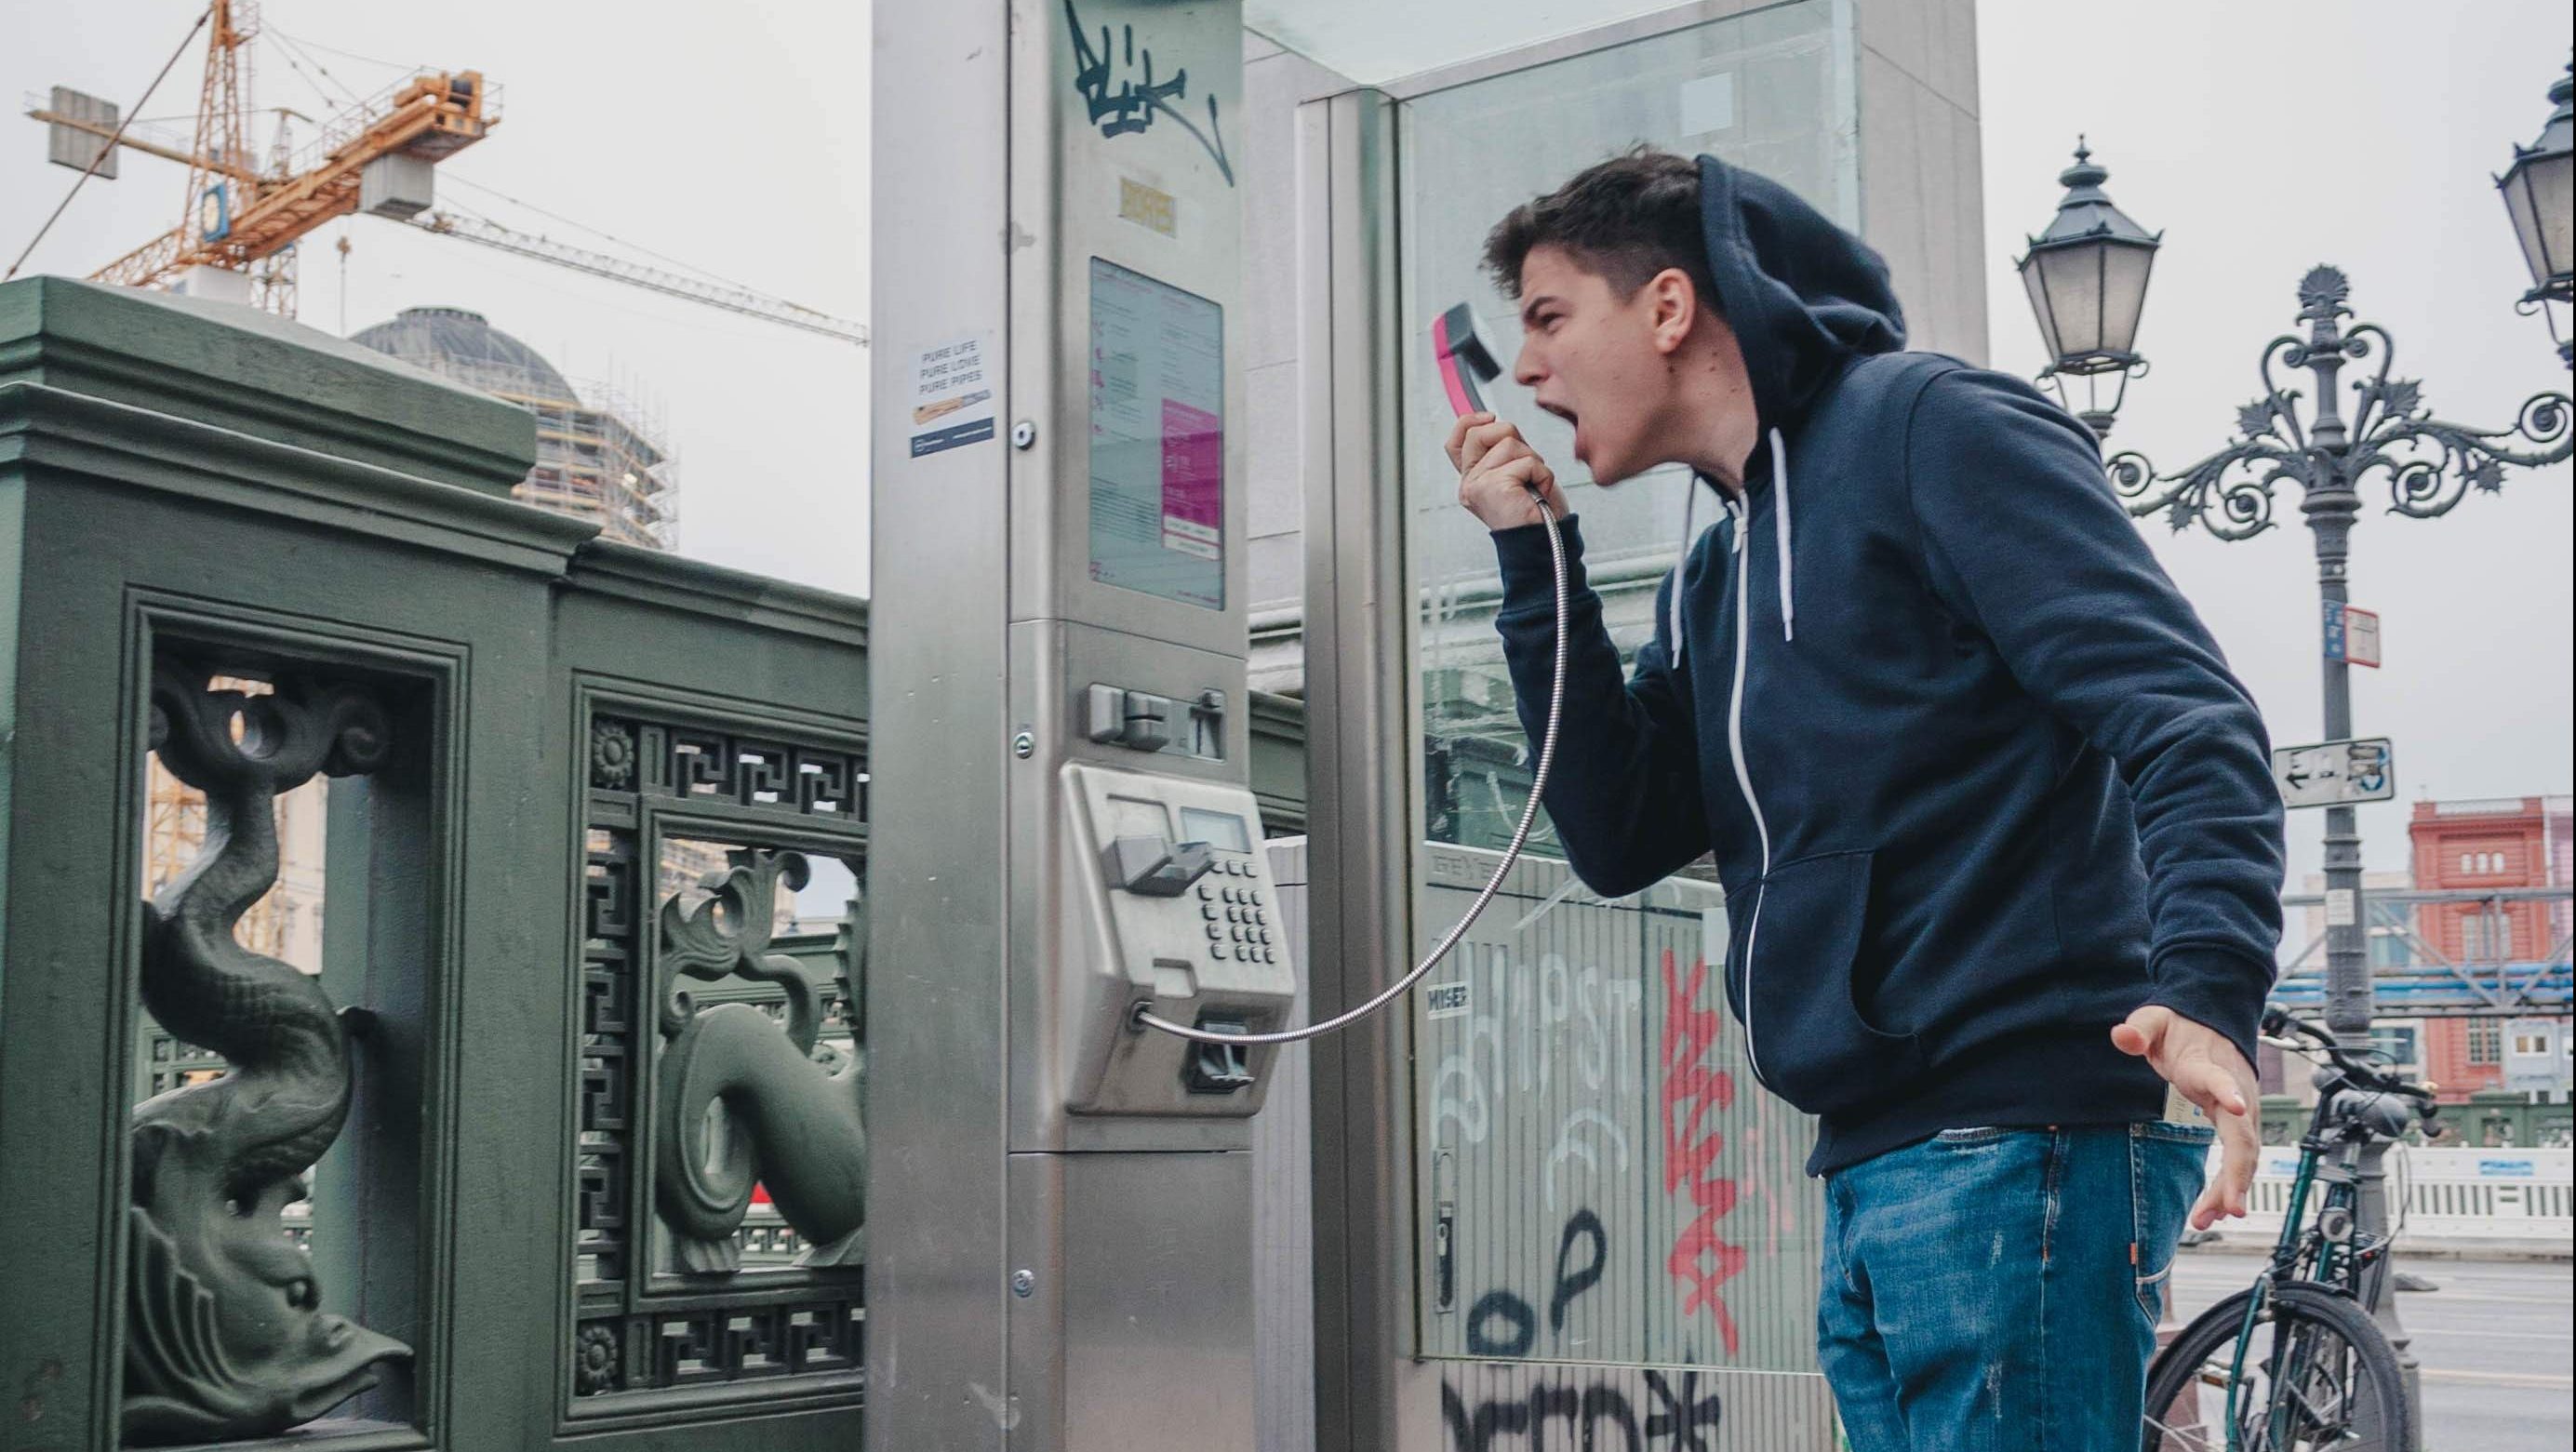 a man yelling into a receiver of a phone booth